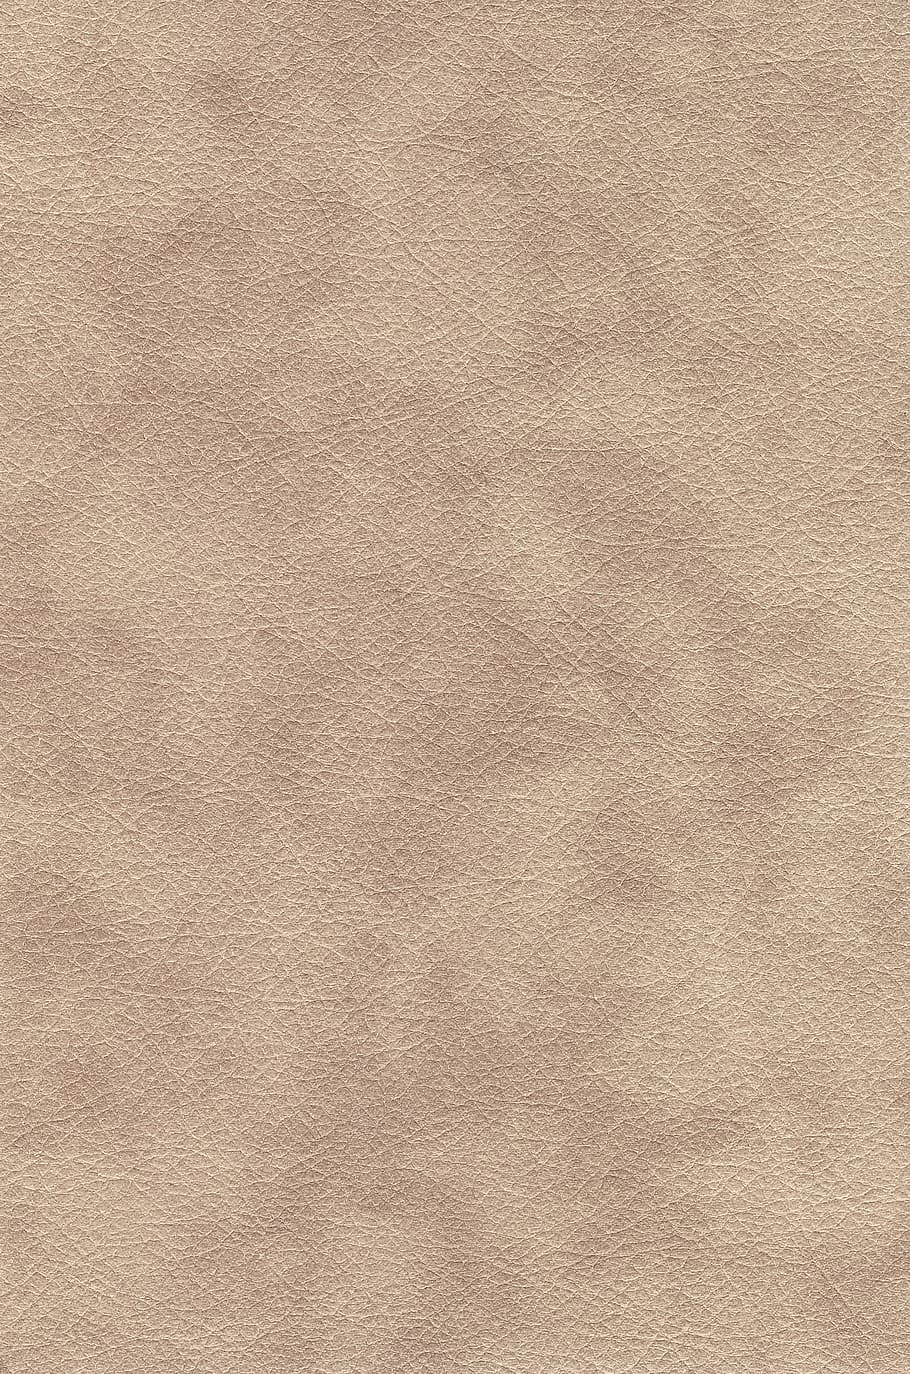 gray carpet, leather, textures, background, fabric, raw, decor